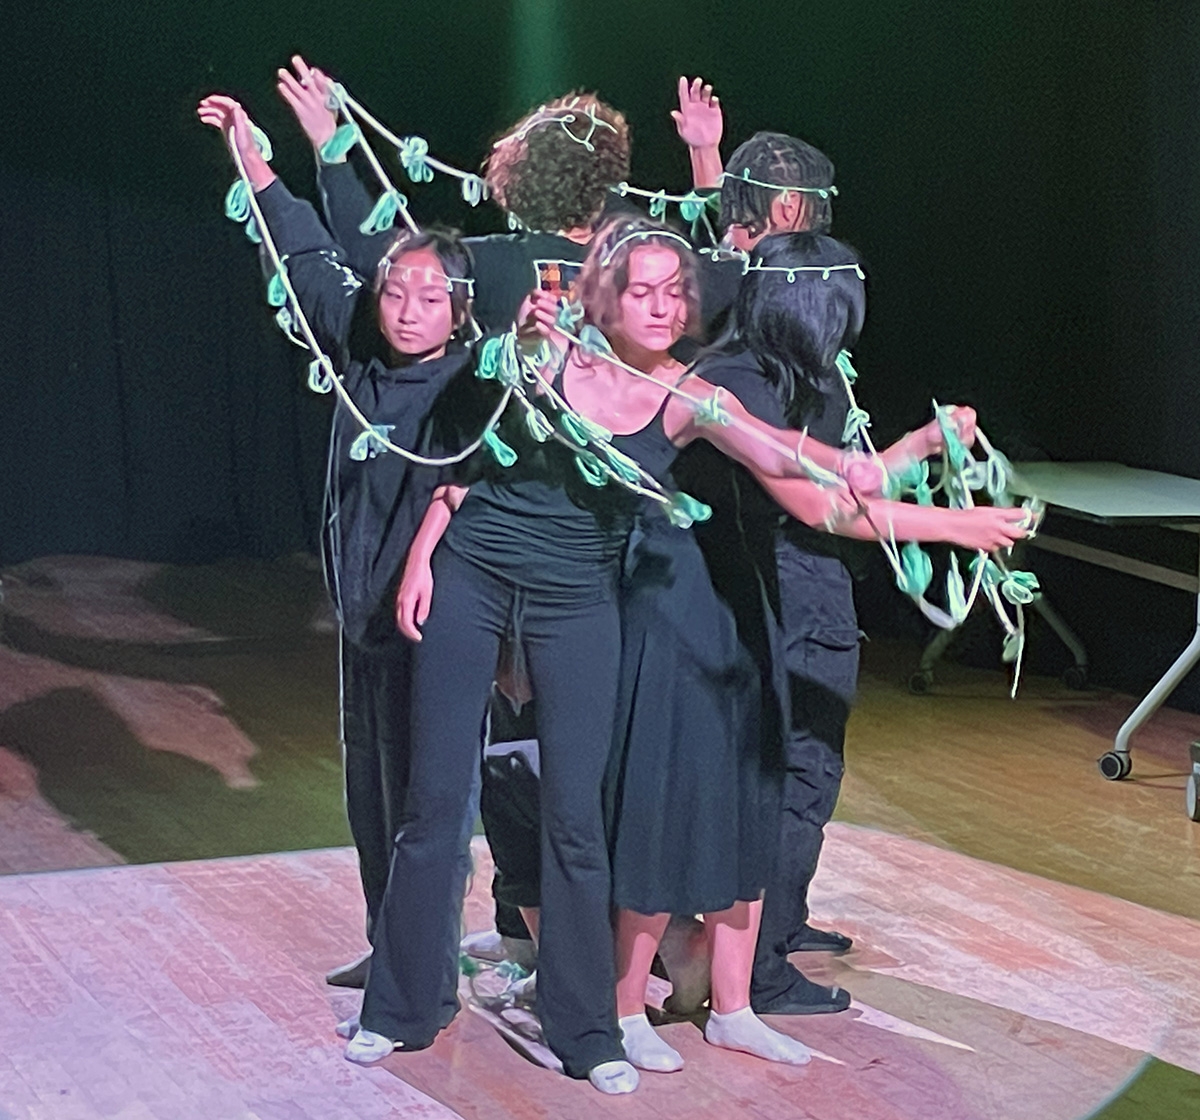 Students dressed in black perform with a green vine wrapped around them